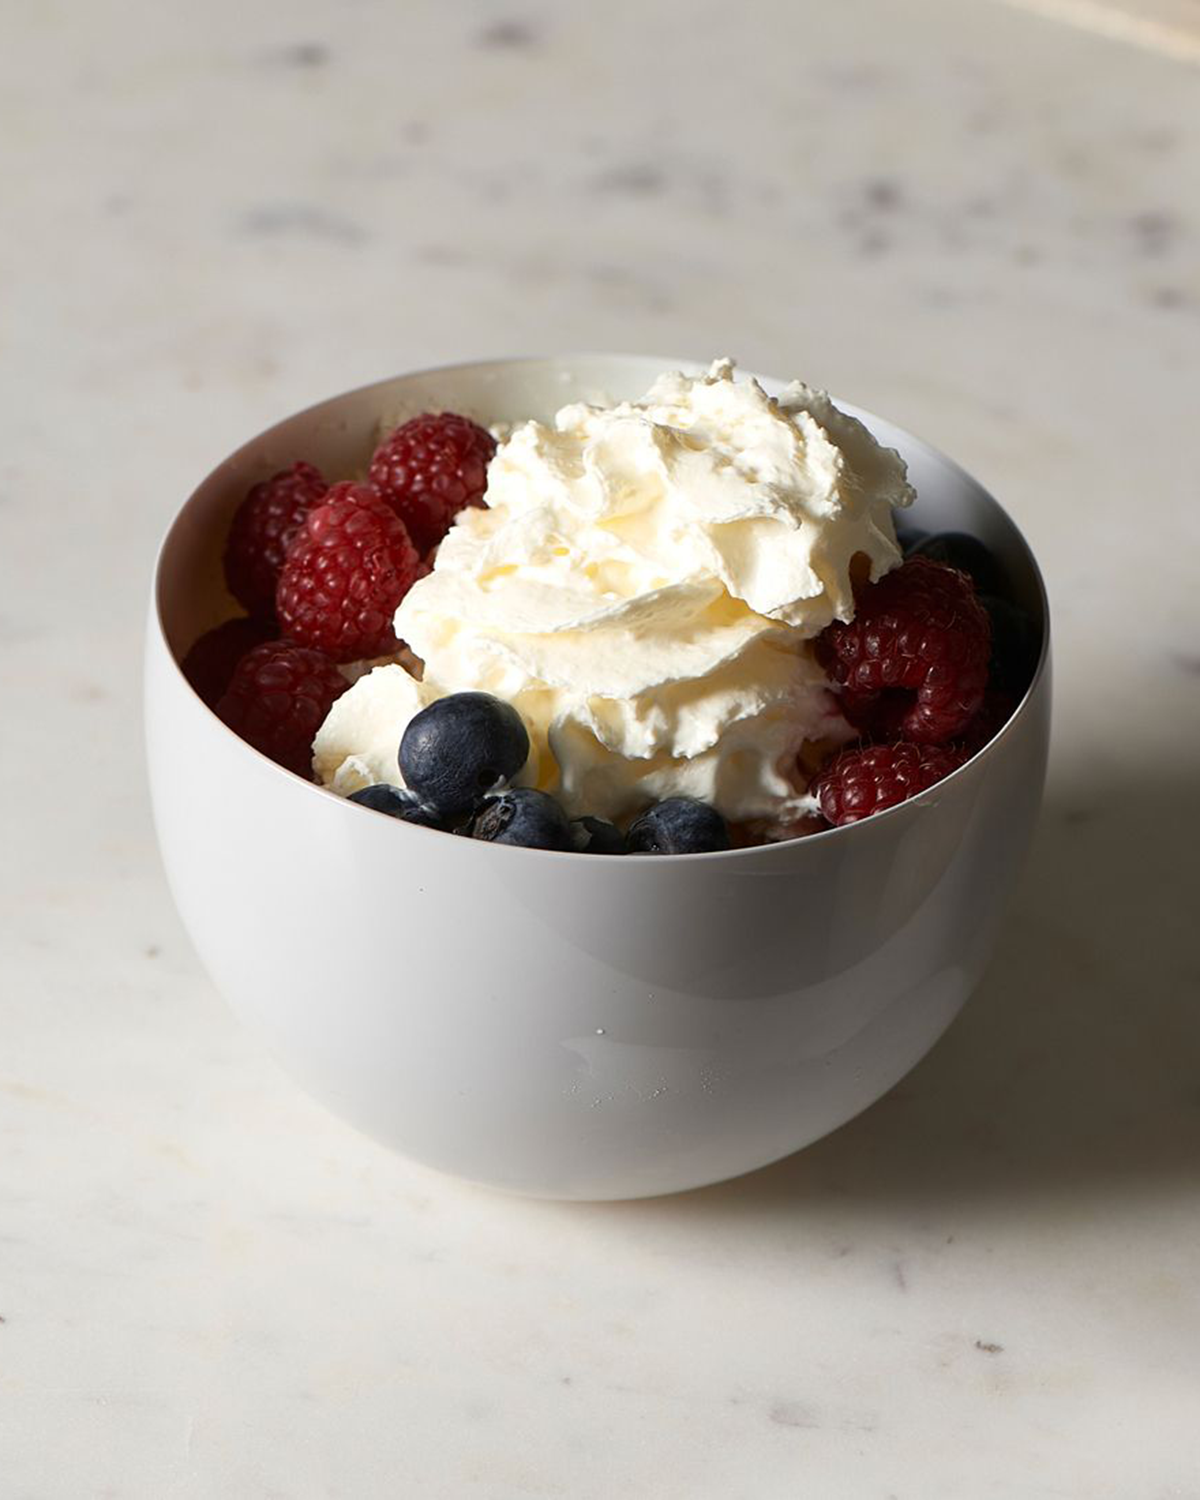 Softly rounded glass bowl in color white, decorated with berries and have creme by Riviera Maison